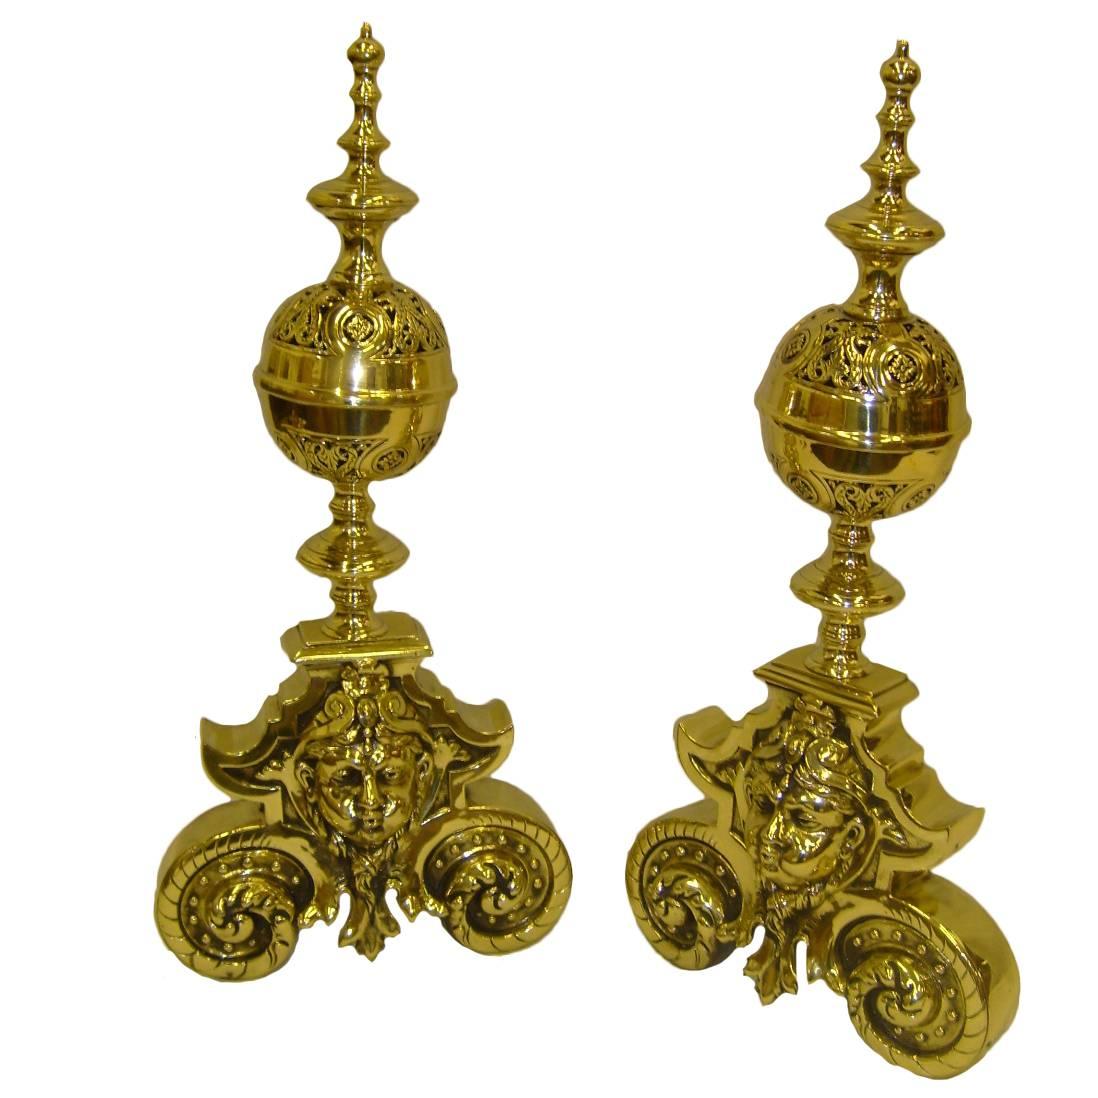 Pair of Polished Brass Chenets or Andirons, 19th Century